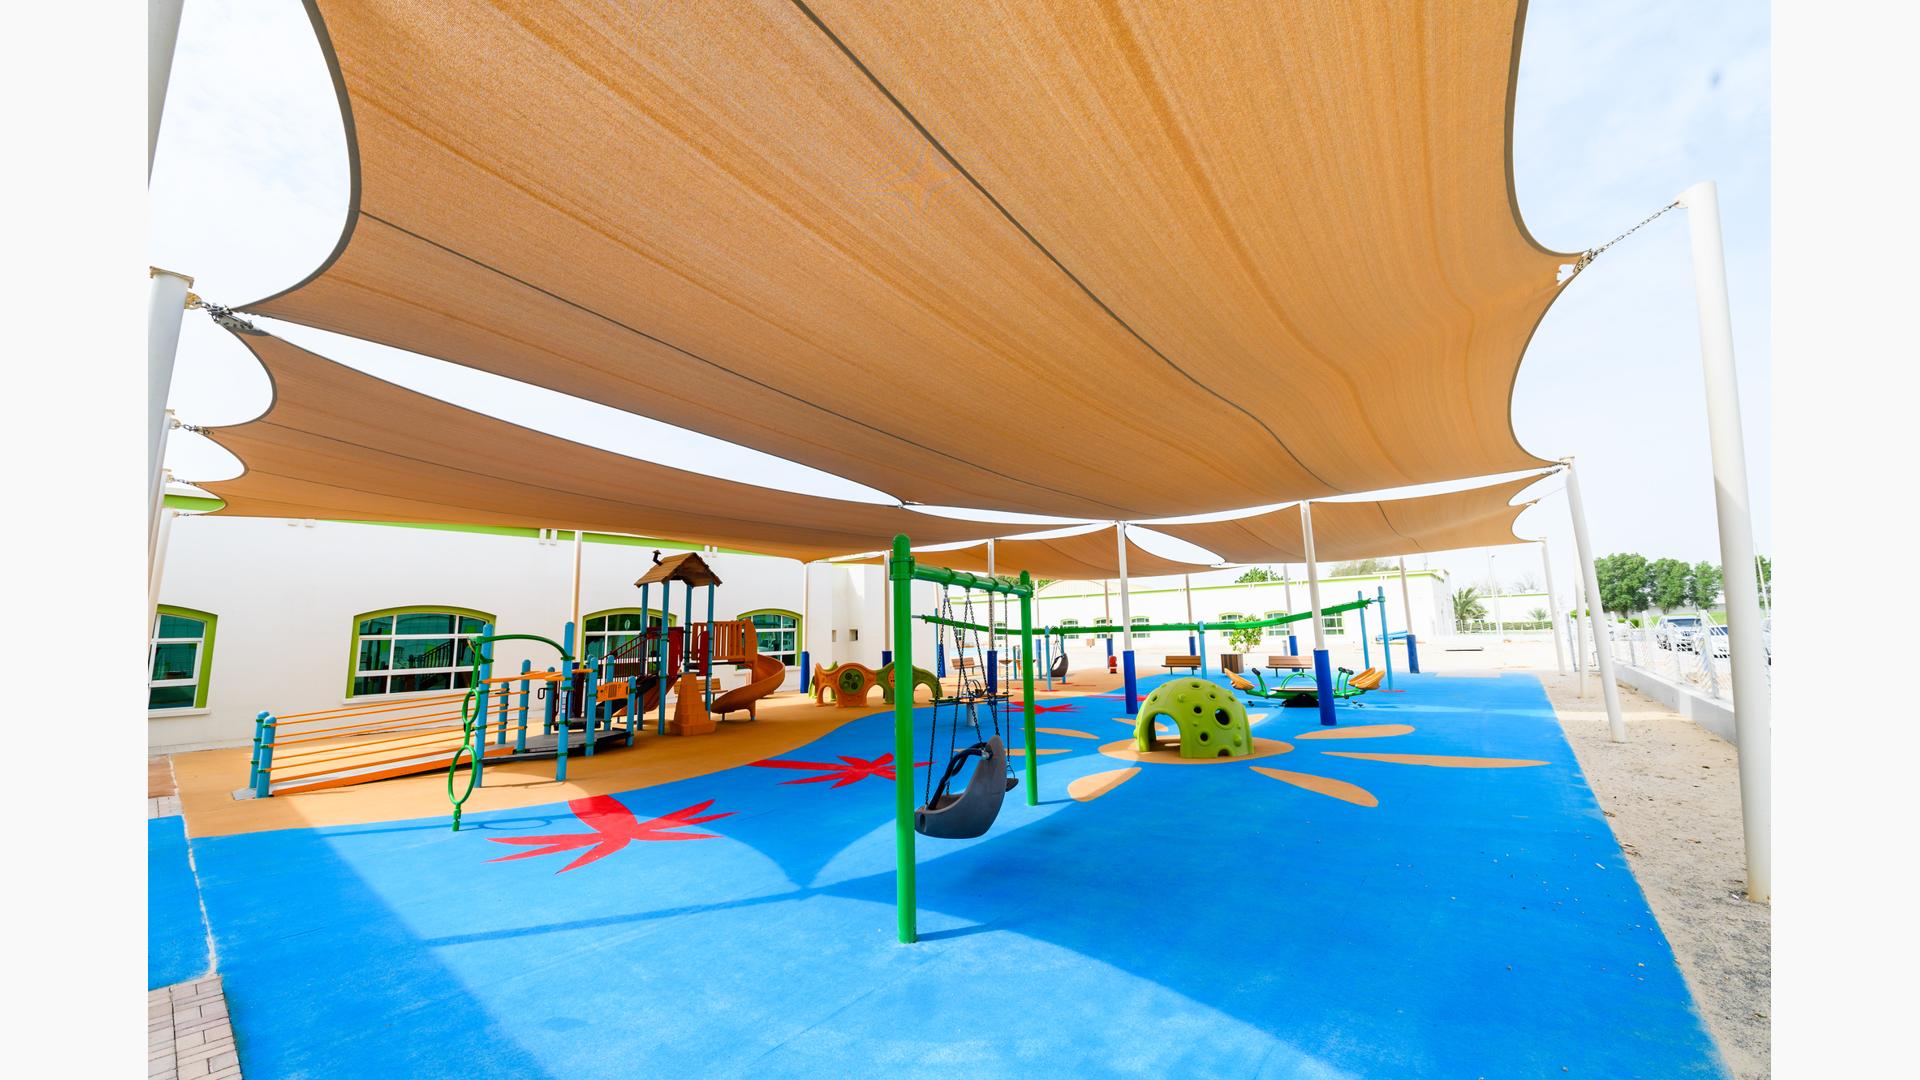 Large tan shade cover this play area with many inclusive playground elements including a ramped playground structure, single post swing, quiet area for kids to take a break and an accessible teeter totter all over colorful unitary surfacing.